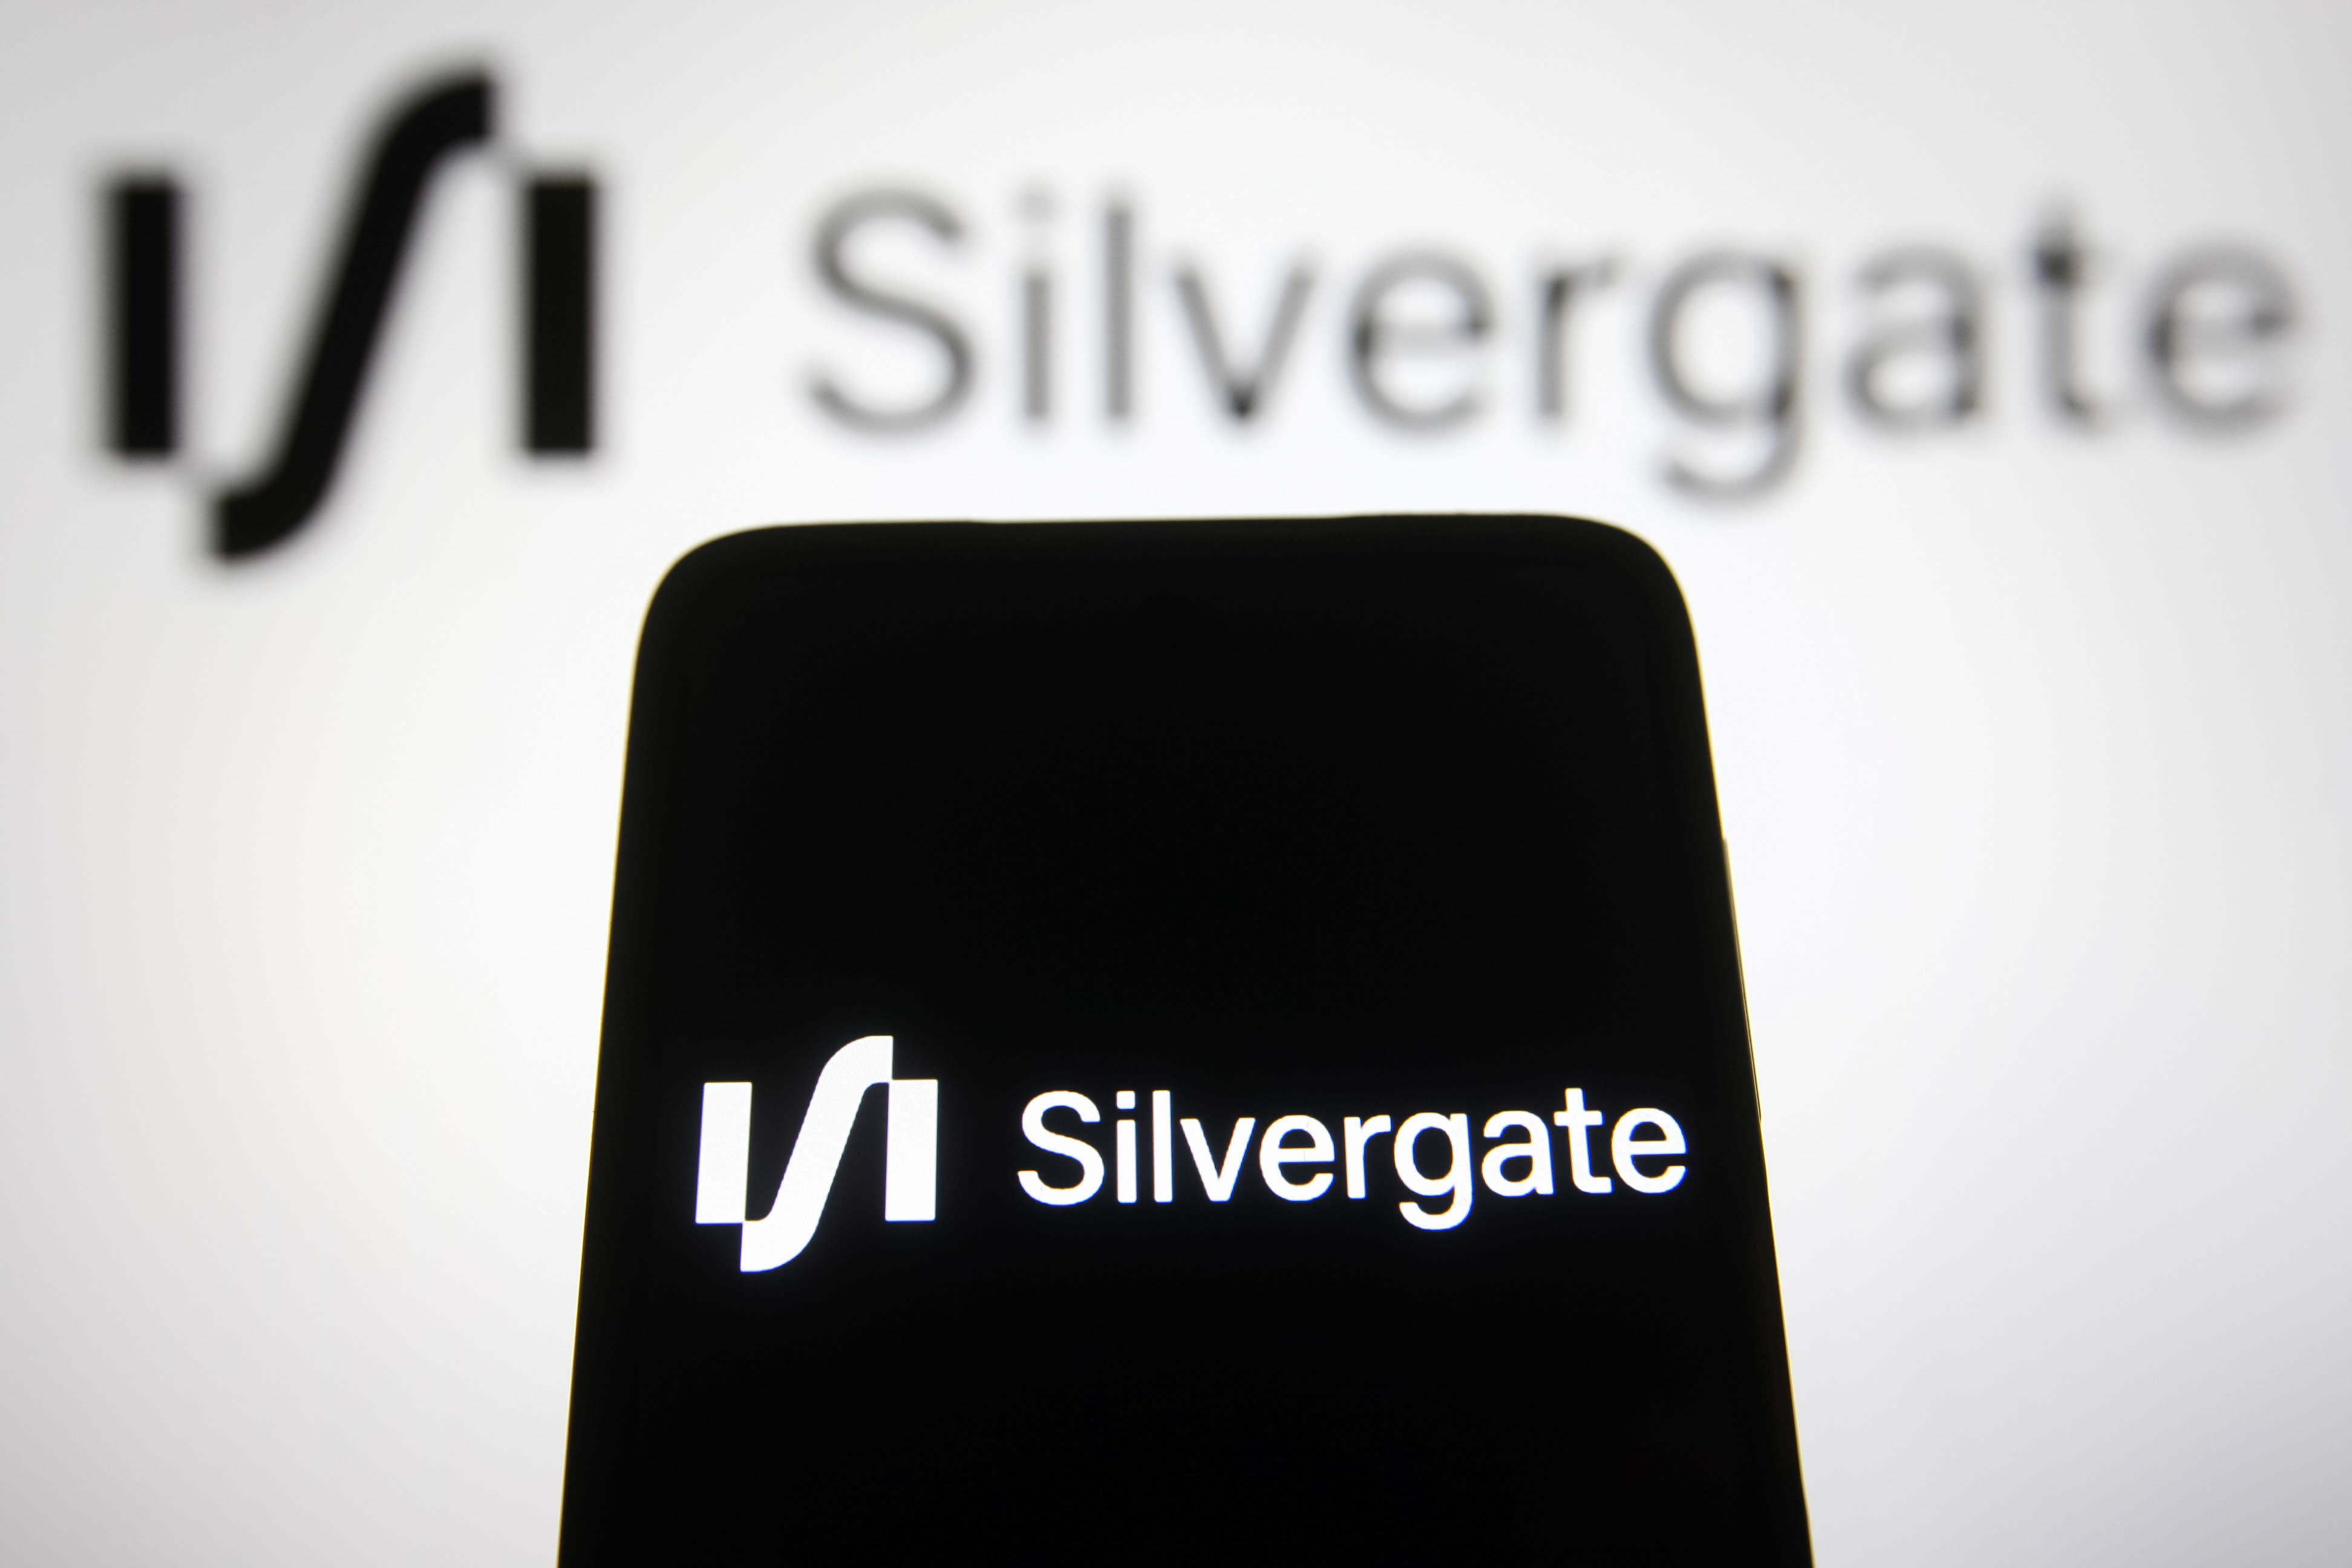 Silvergate, Etsy, SVB Financial, Uber and more